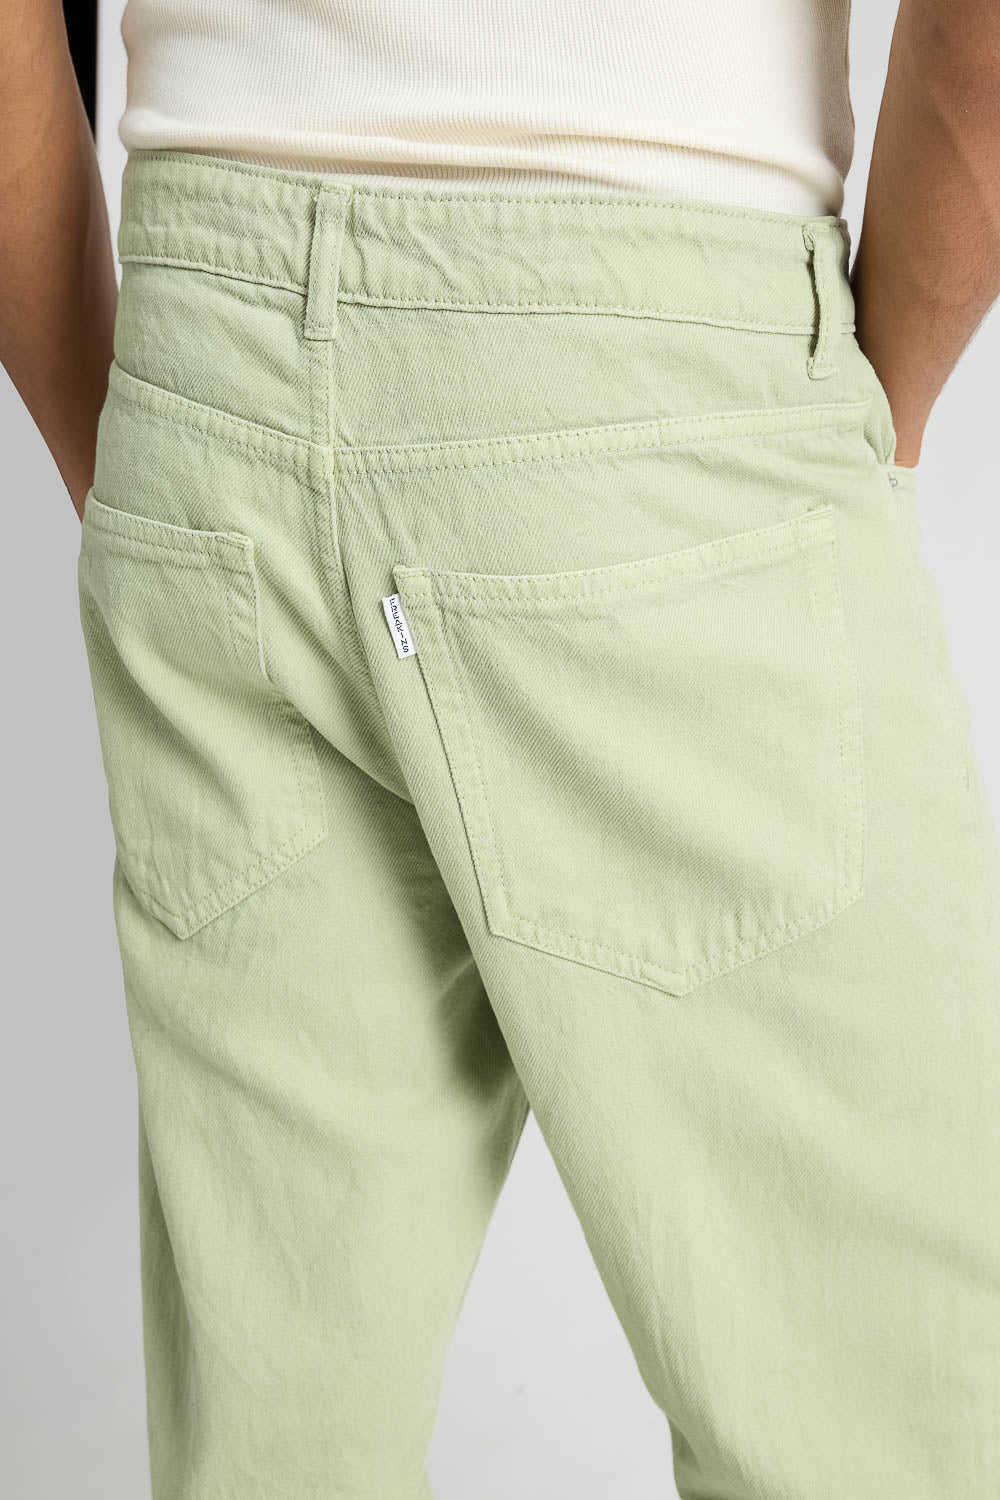 Sage Green Men's Straight Fit Jeans